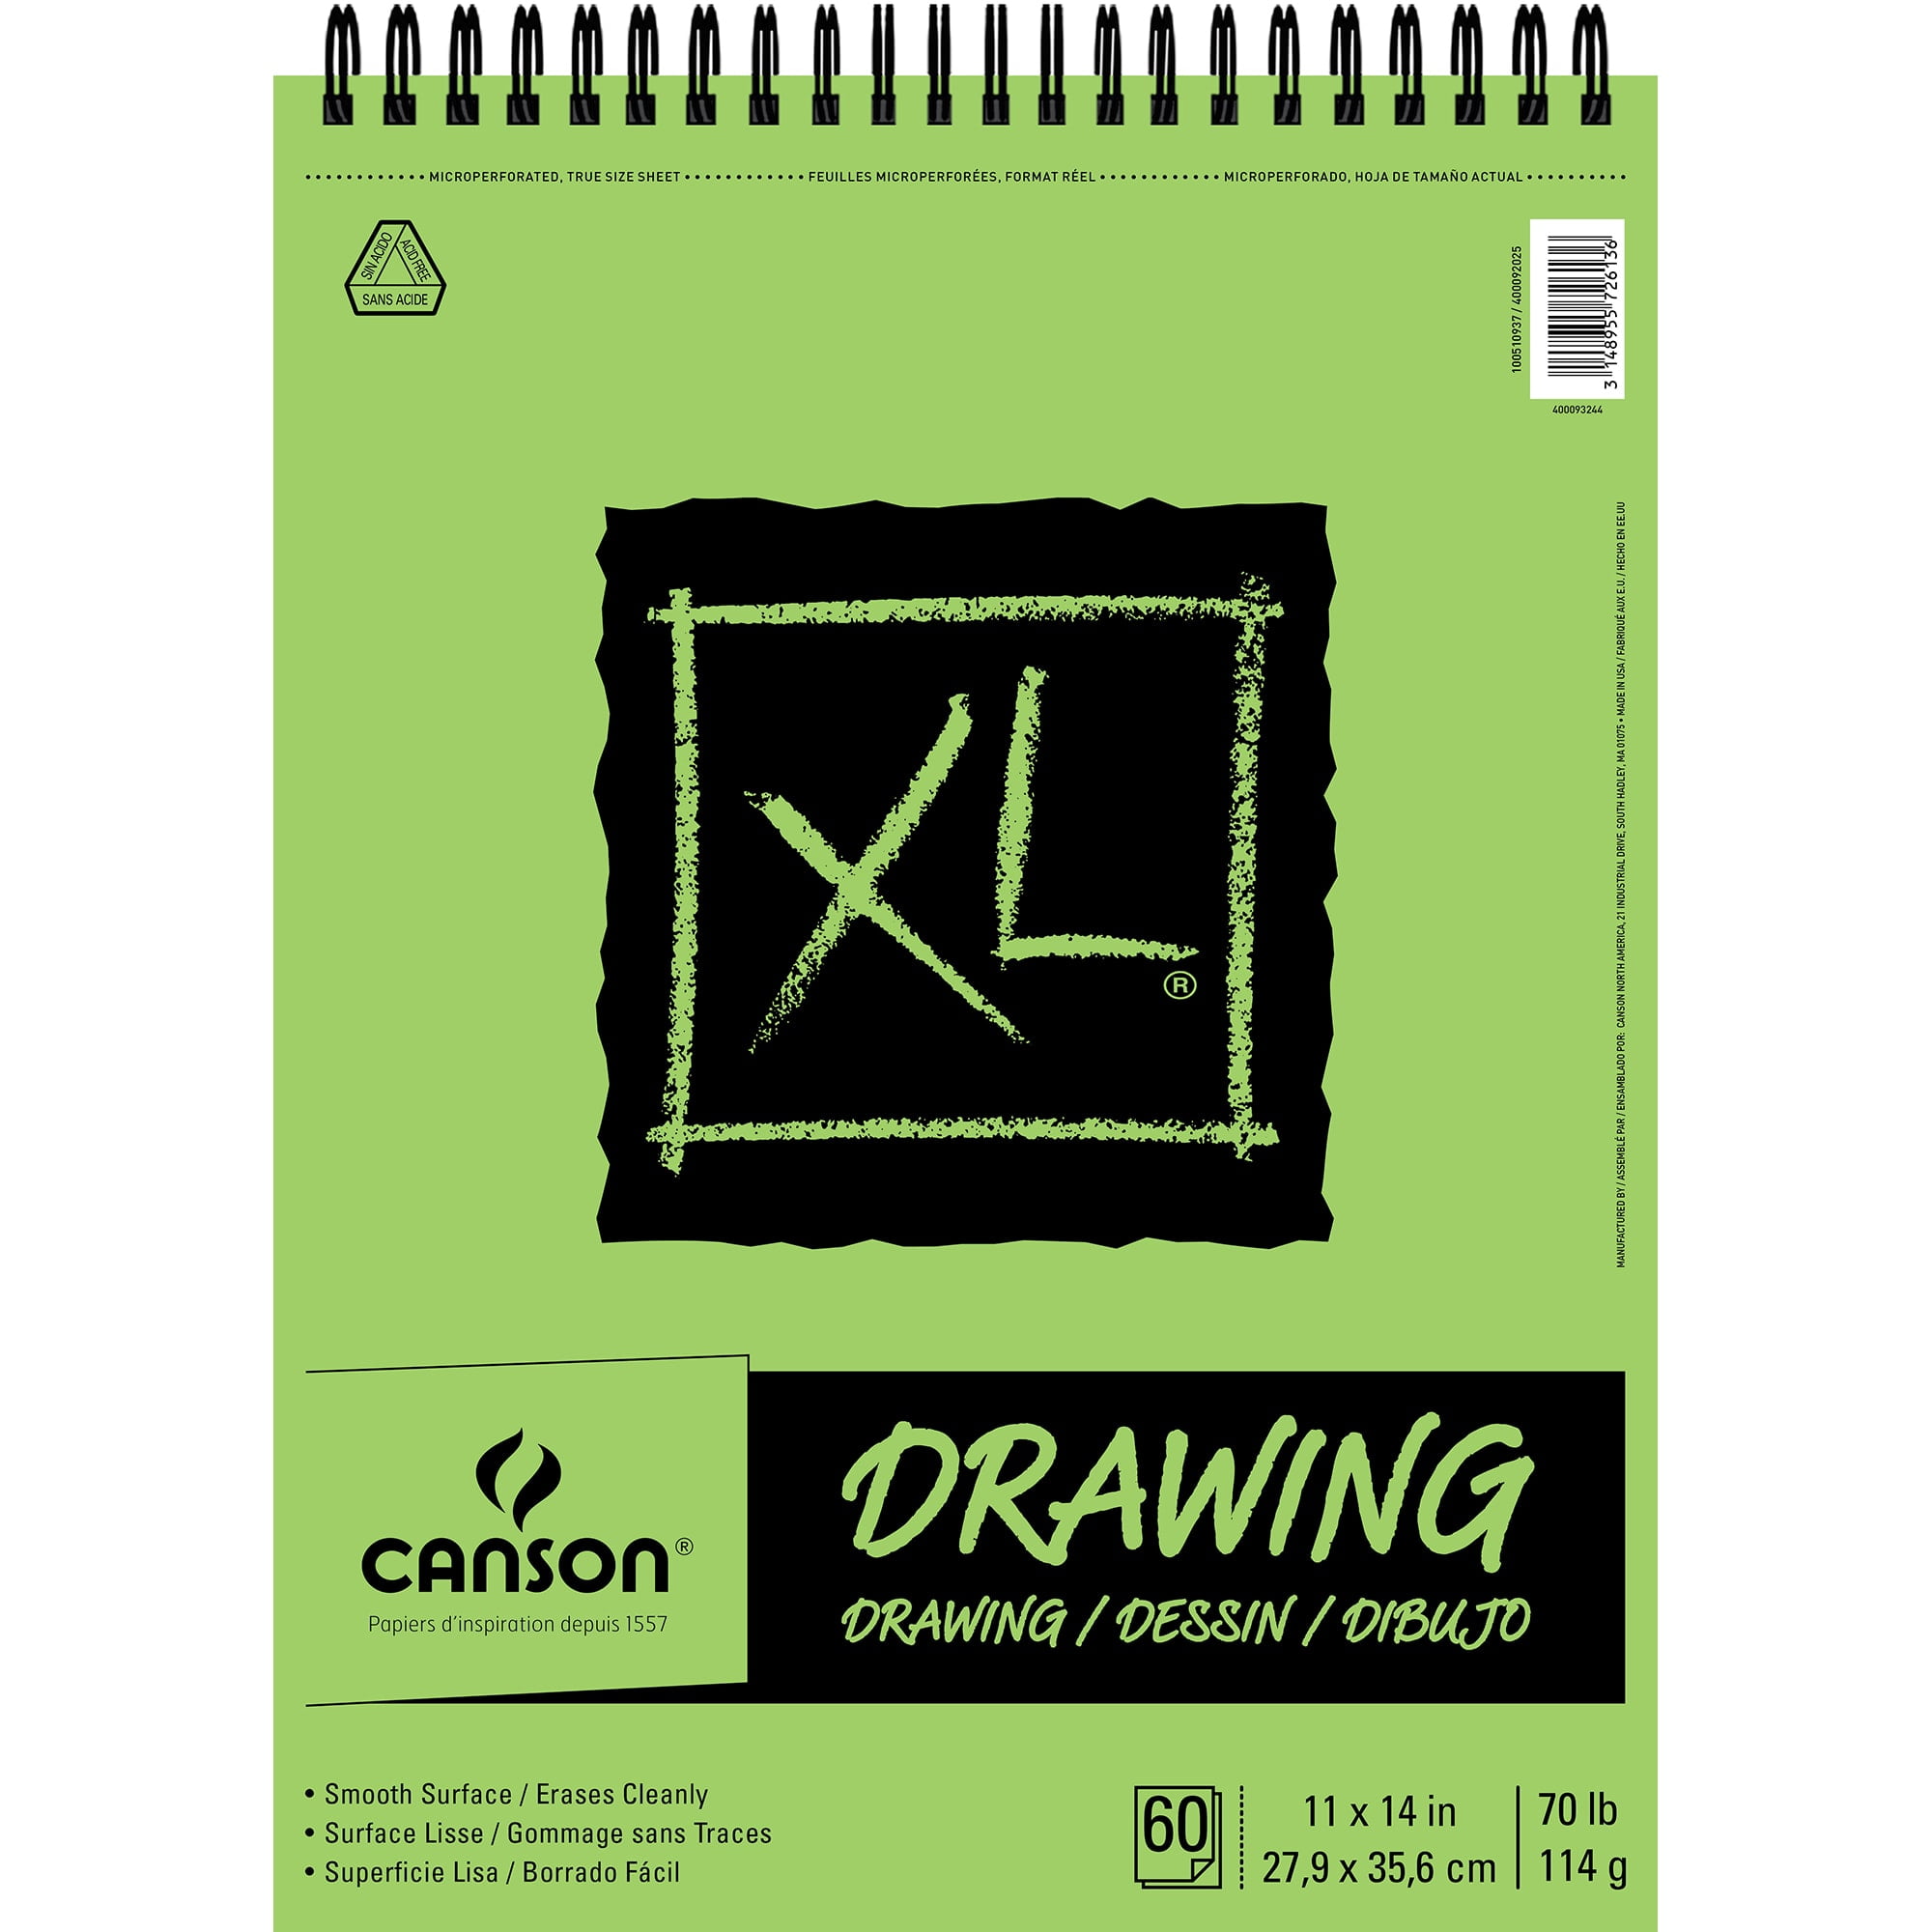 Canson XL MULTI-MEDIA Paper Pad, 60 Sheets, Size: 11 inch x 14 inch